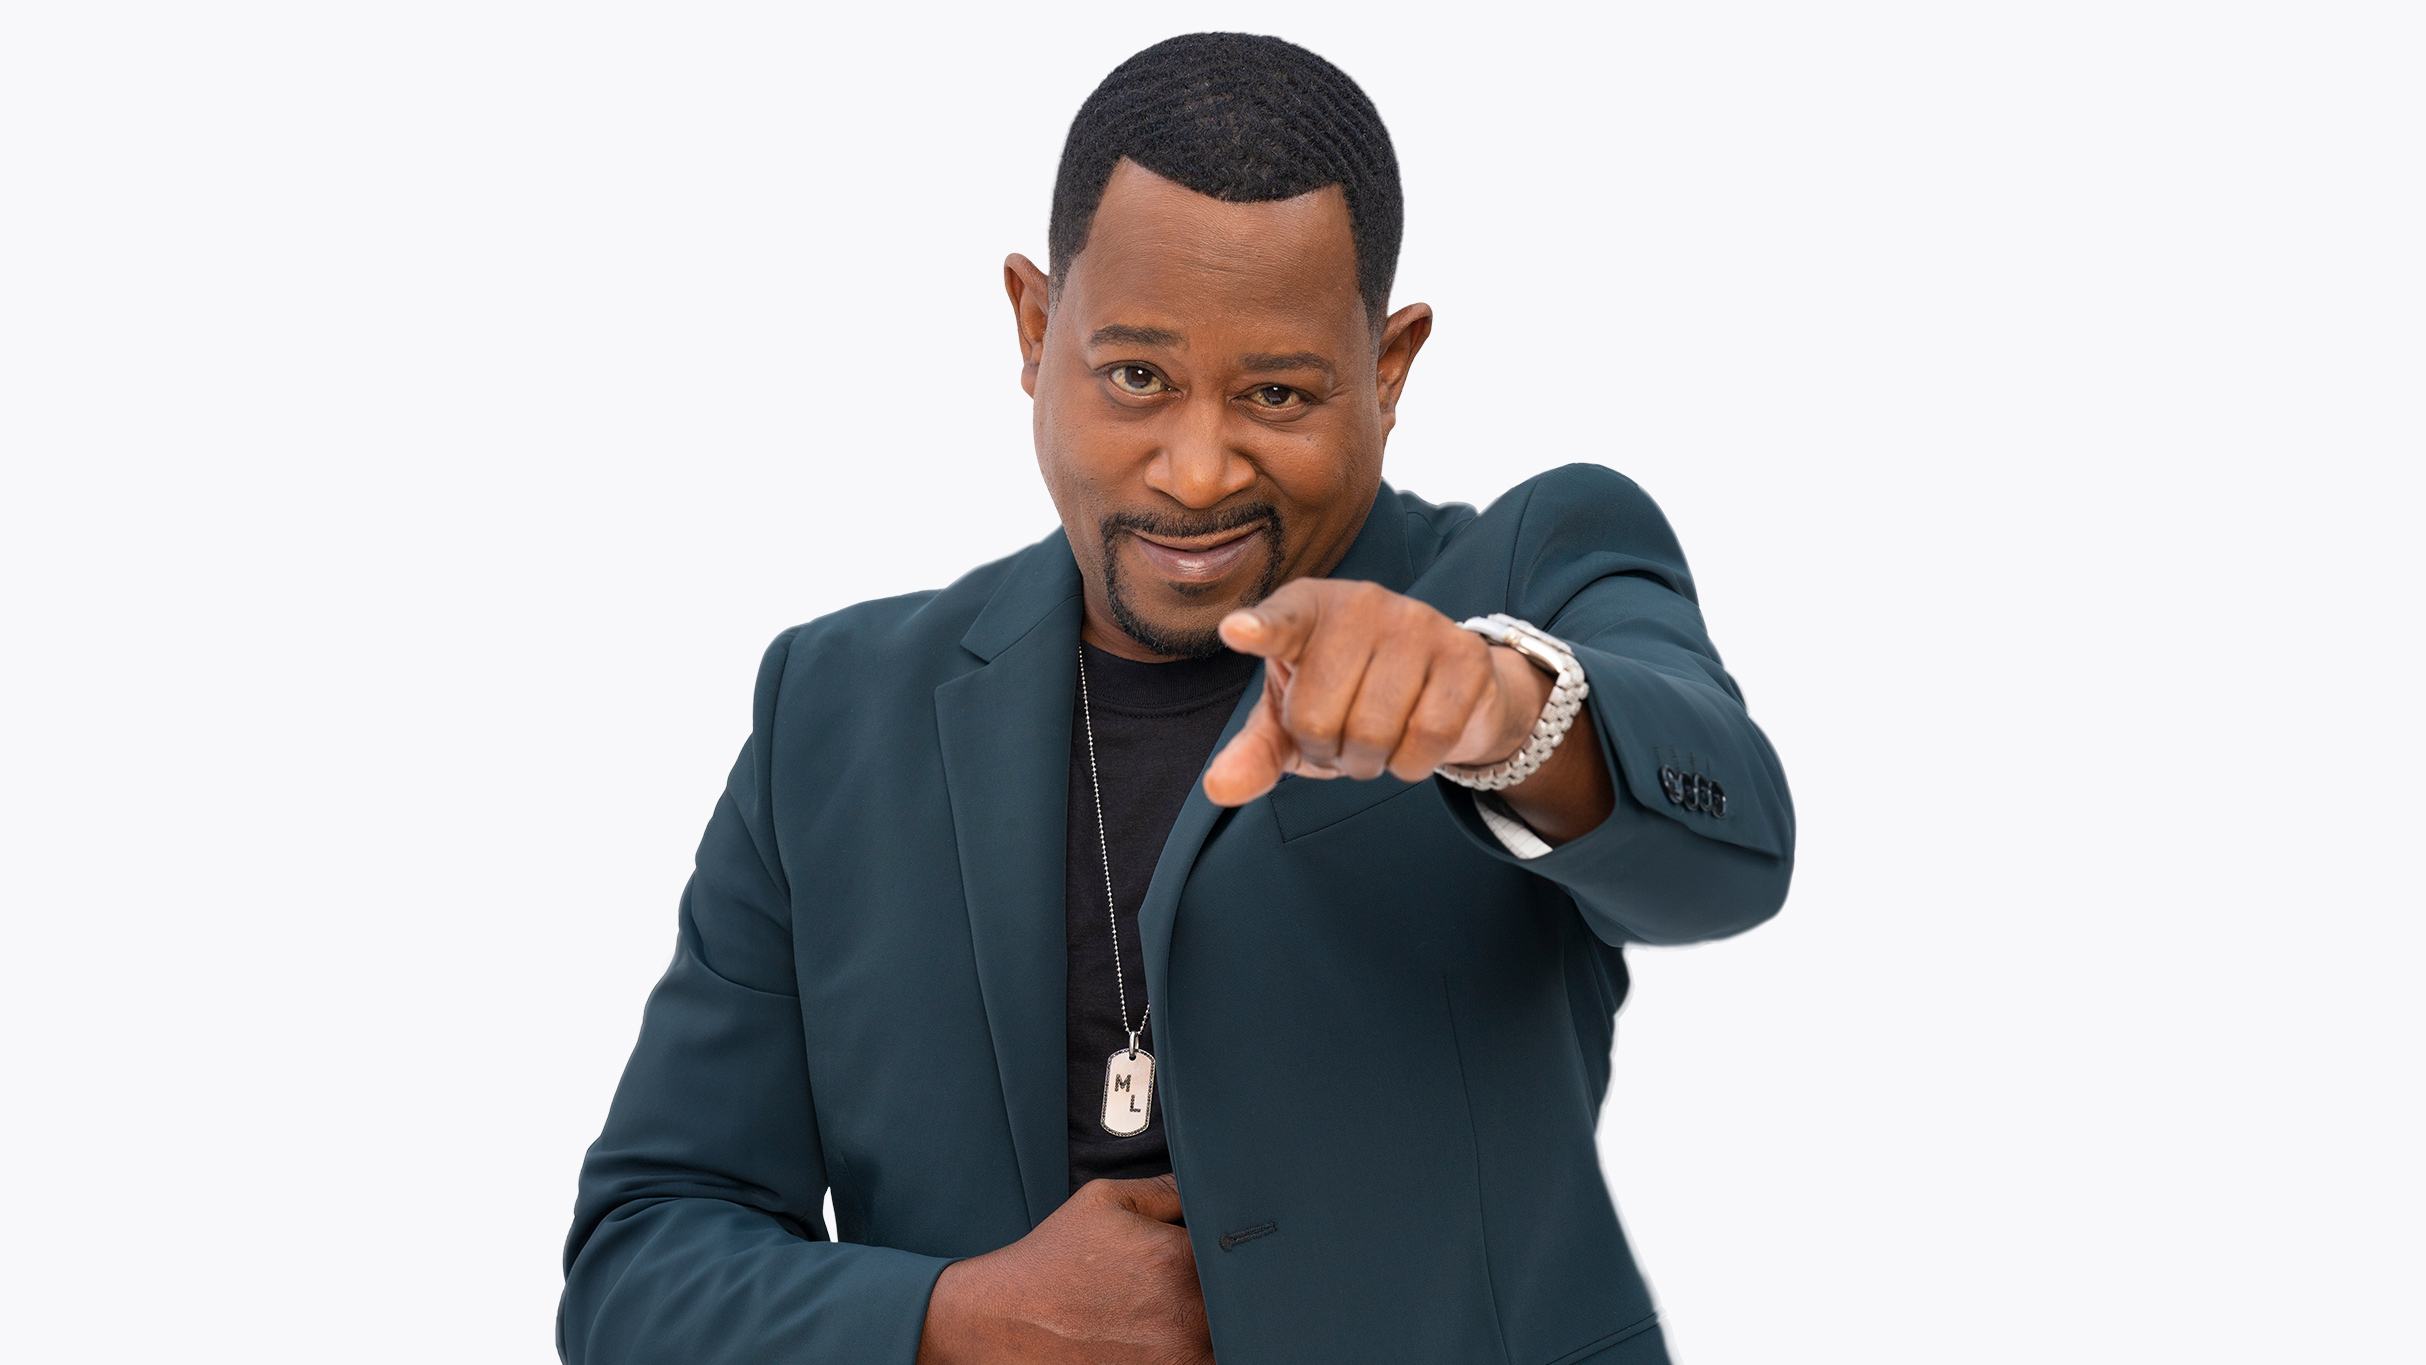 Martin Lawrence with special guests Benji Brown & Daphnique Springs